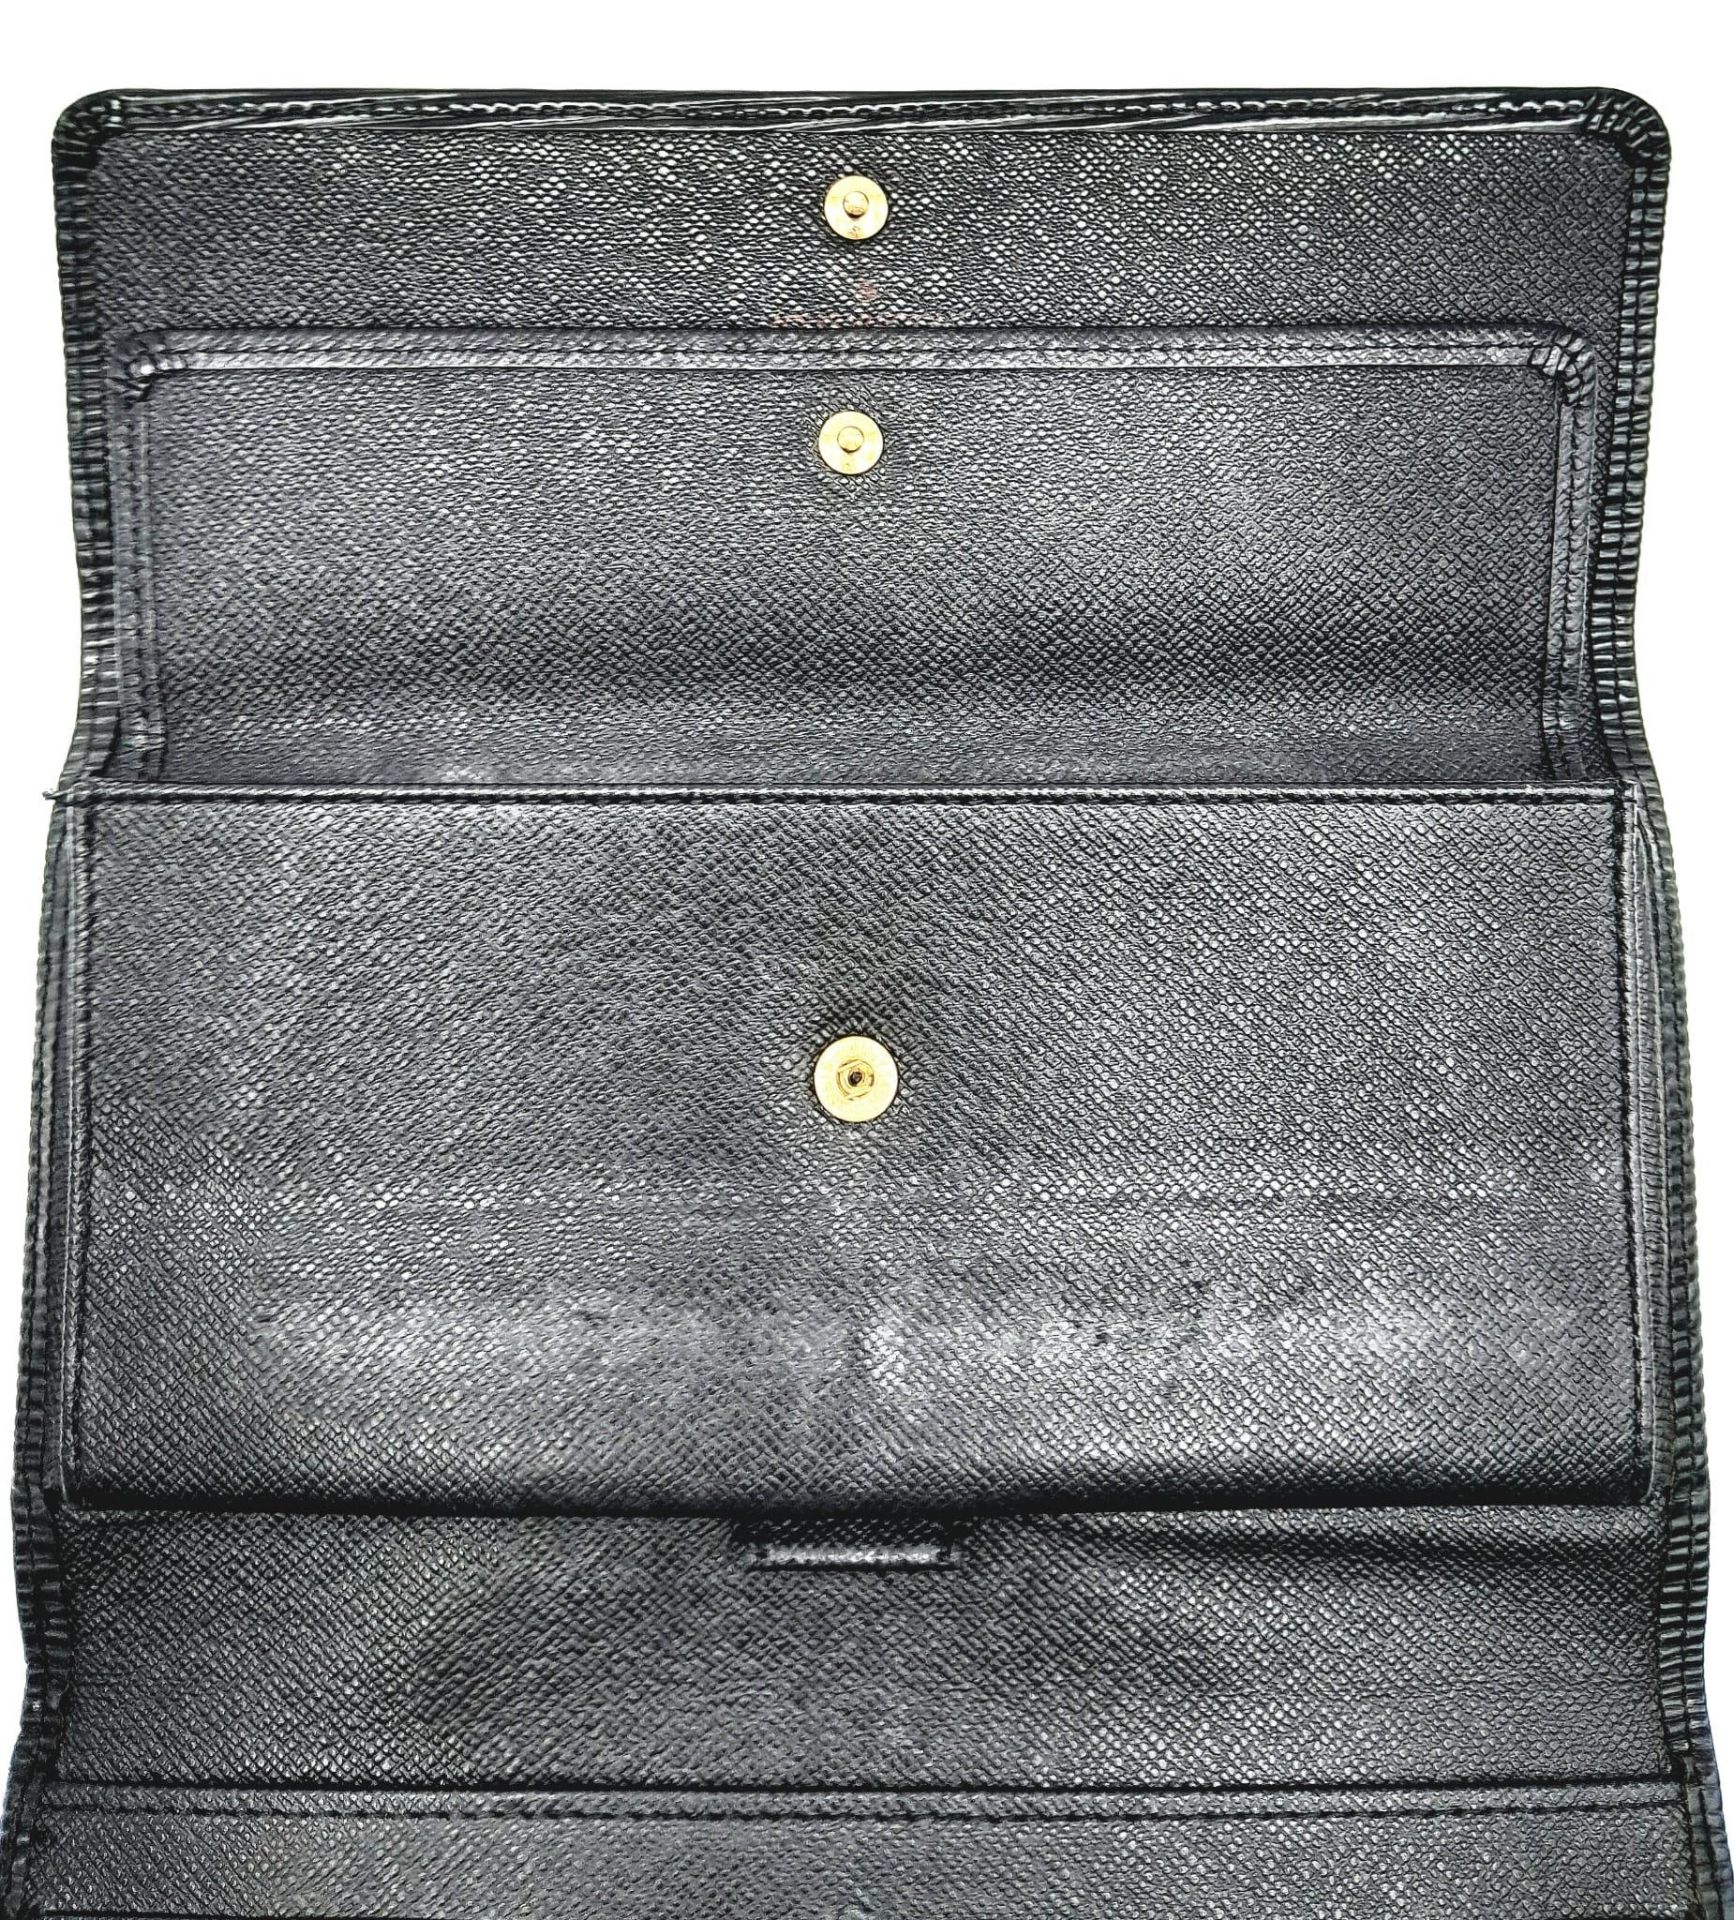 A Louis Vuitton Black 'Sarah' Wallet. Epi leather exterior with the LV logo and press stud - Image 5 of 8